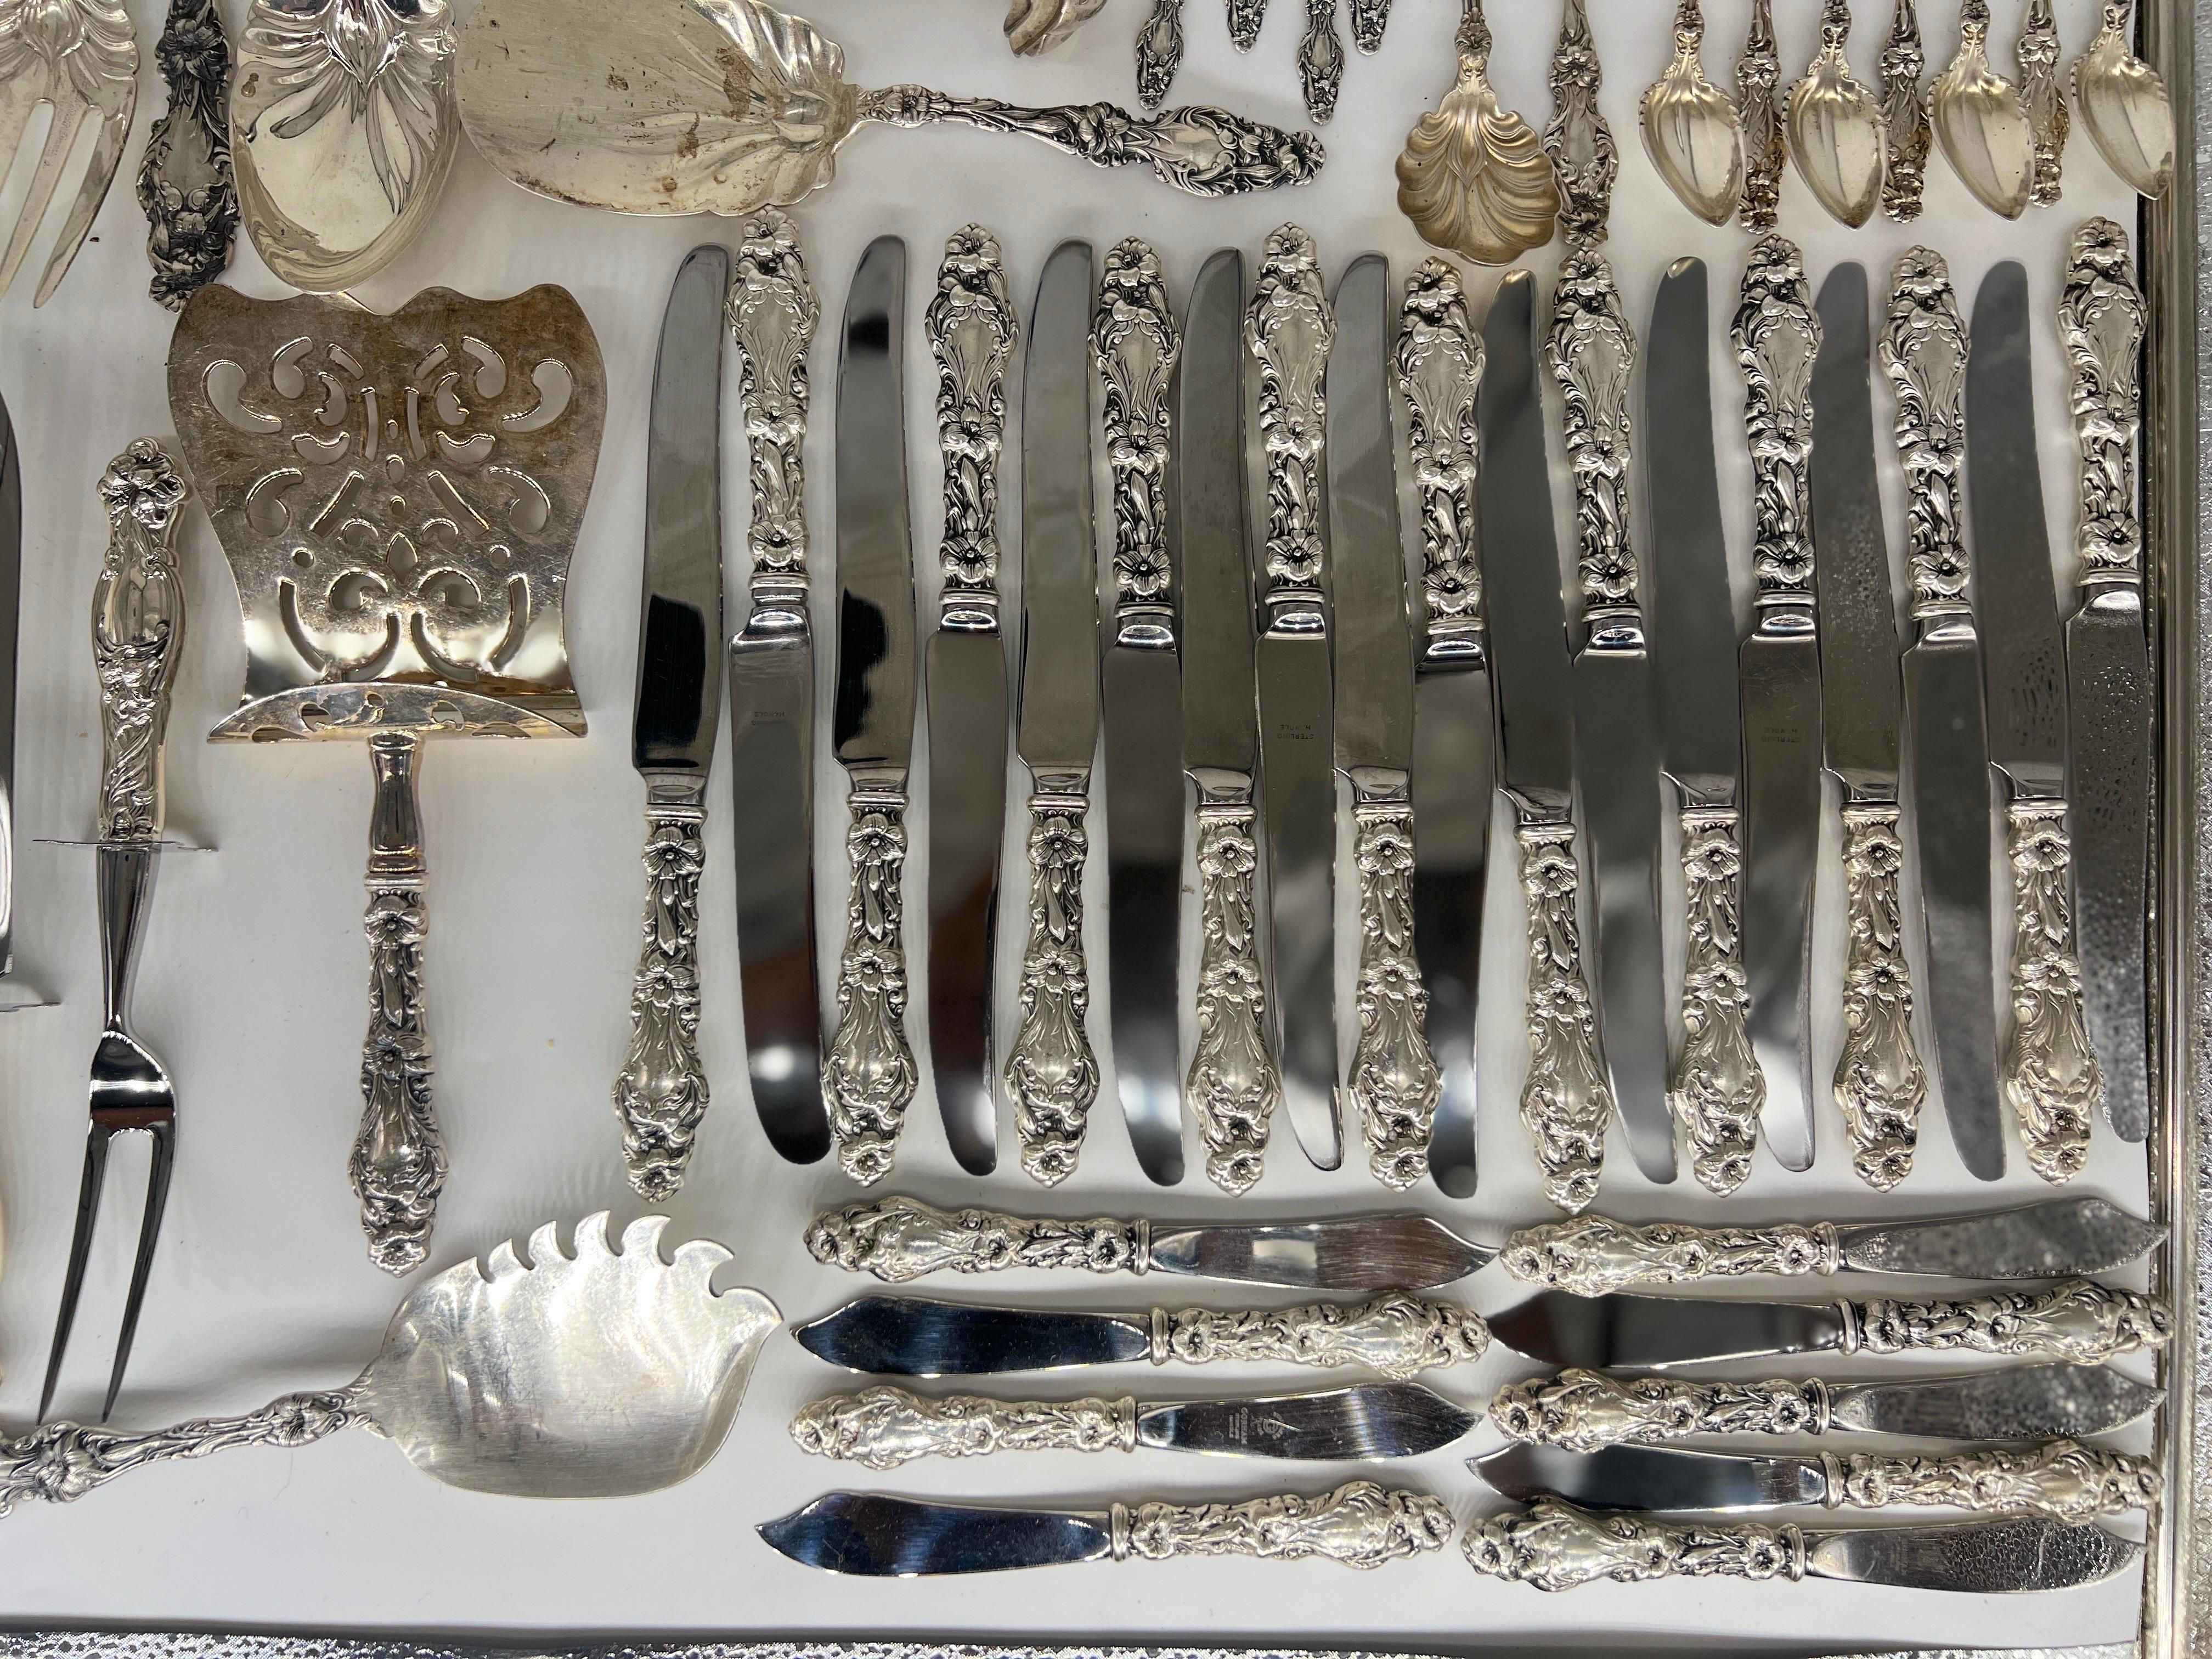 161 Pc, “Lily” Whiting Sterling Silver Flatware Service 5 Place Setting for 18 For Sale 2